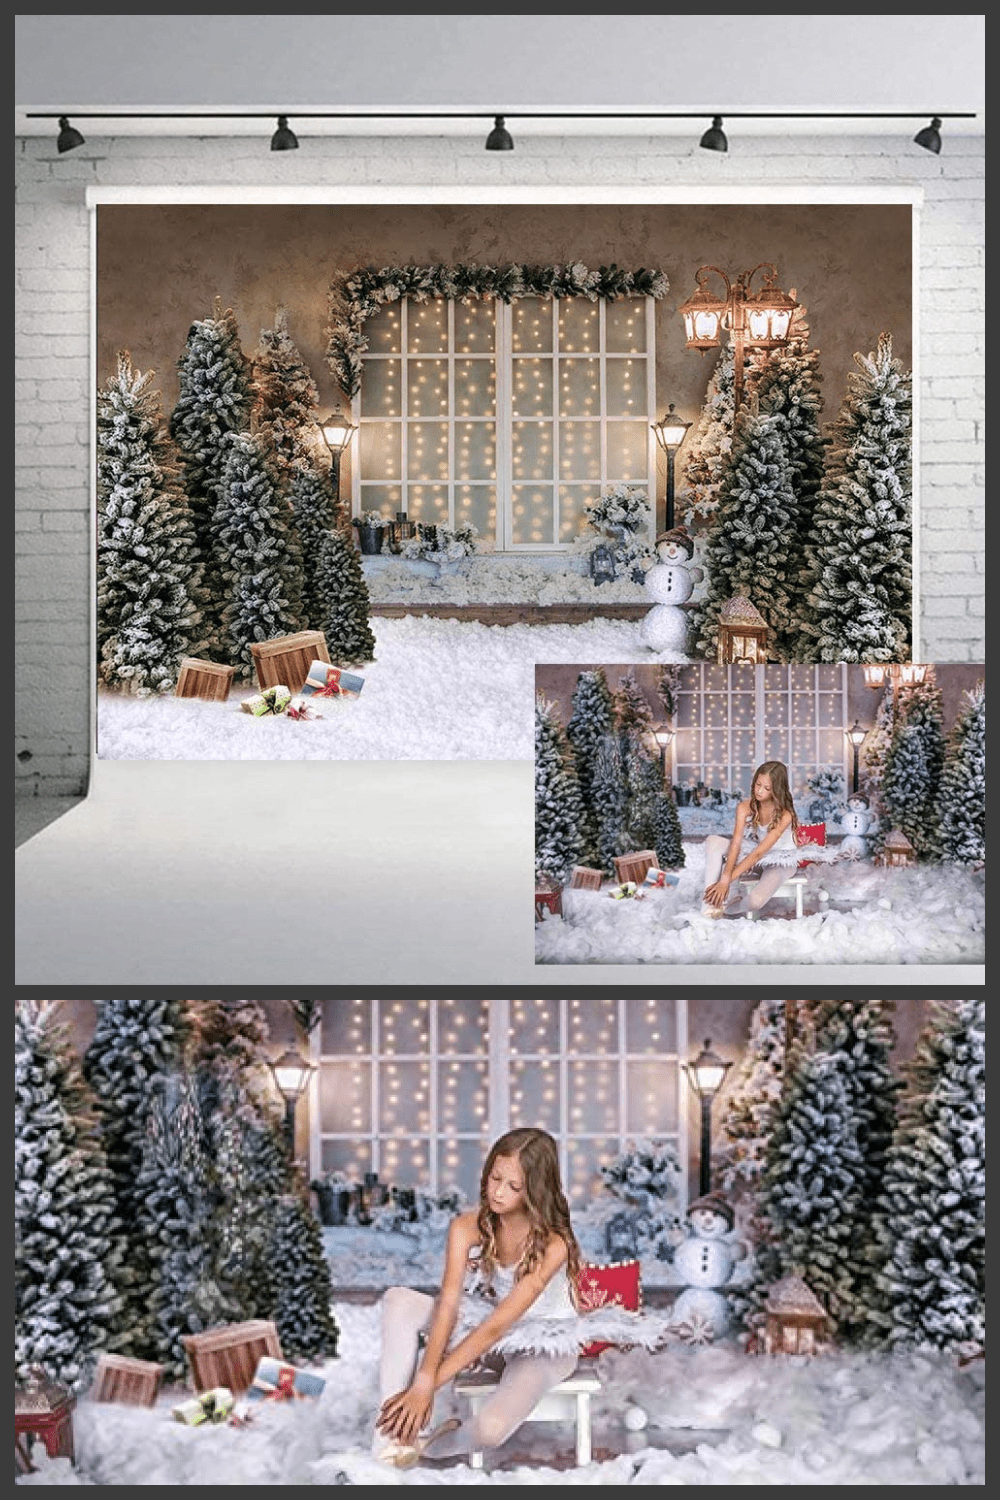 a window decorated with garlands with white curtains, Christmas trees and a girl.